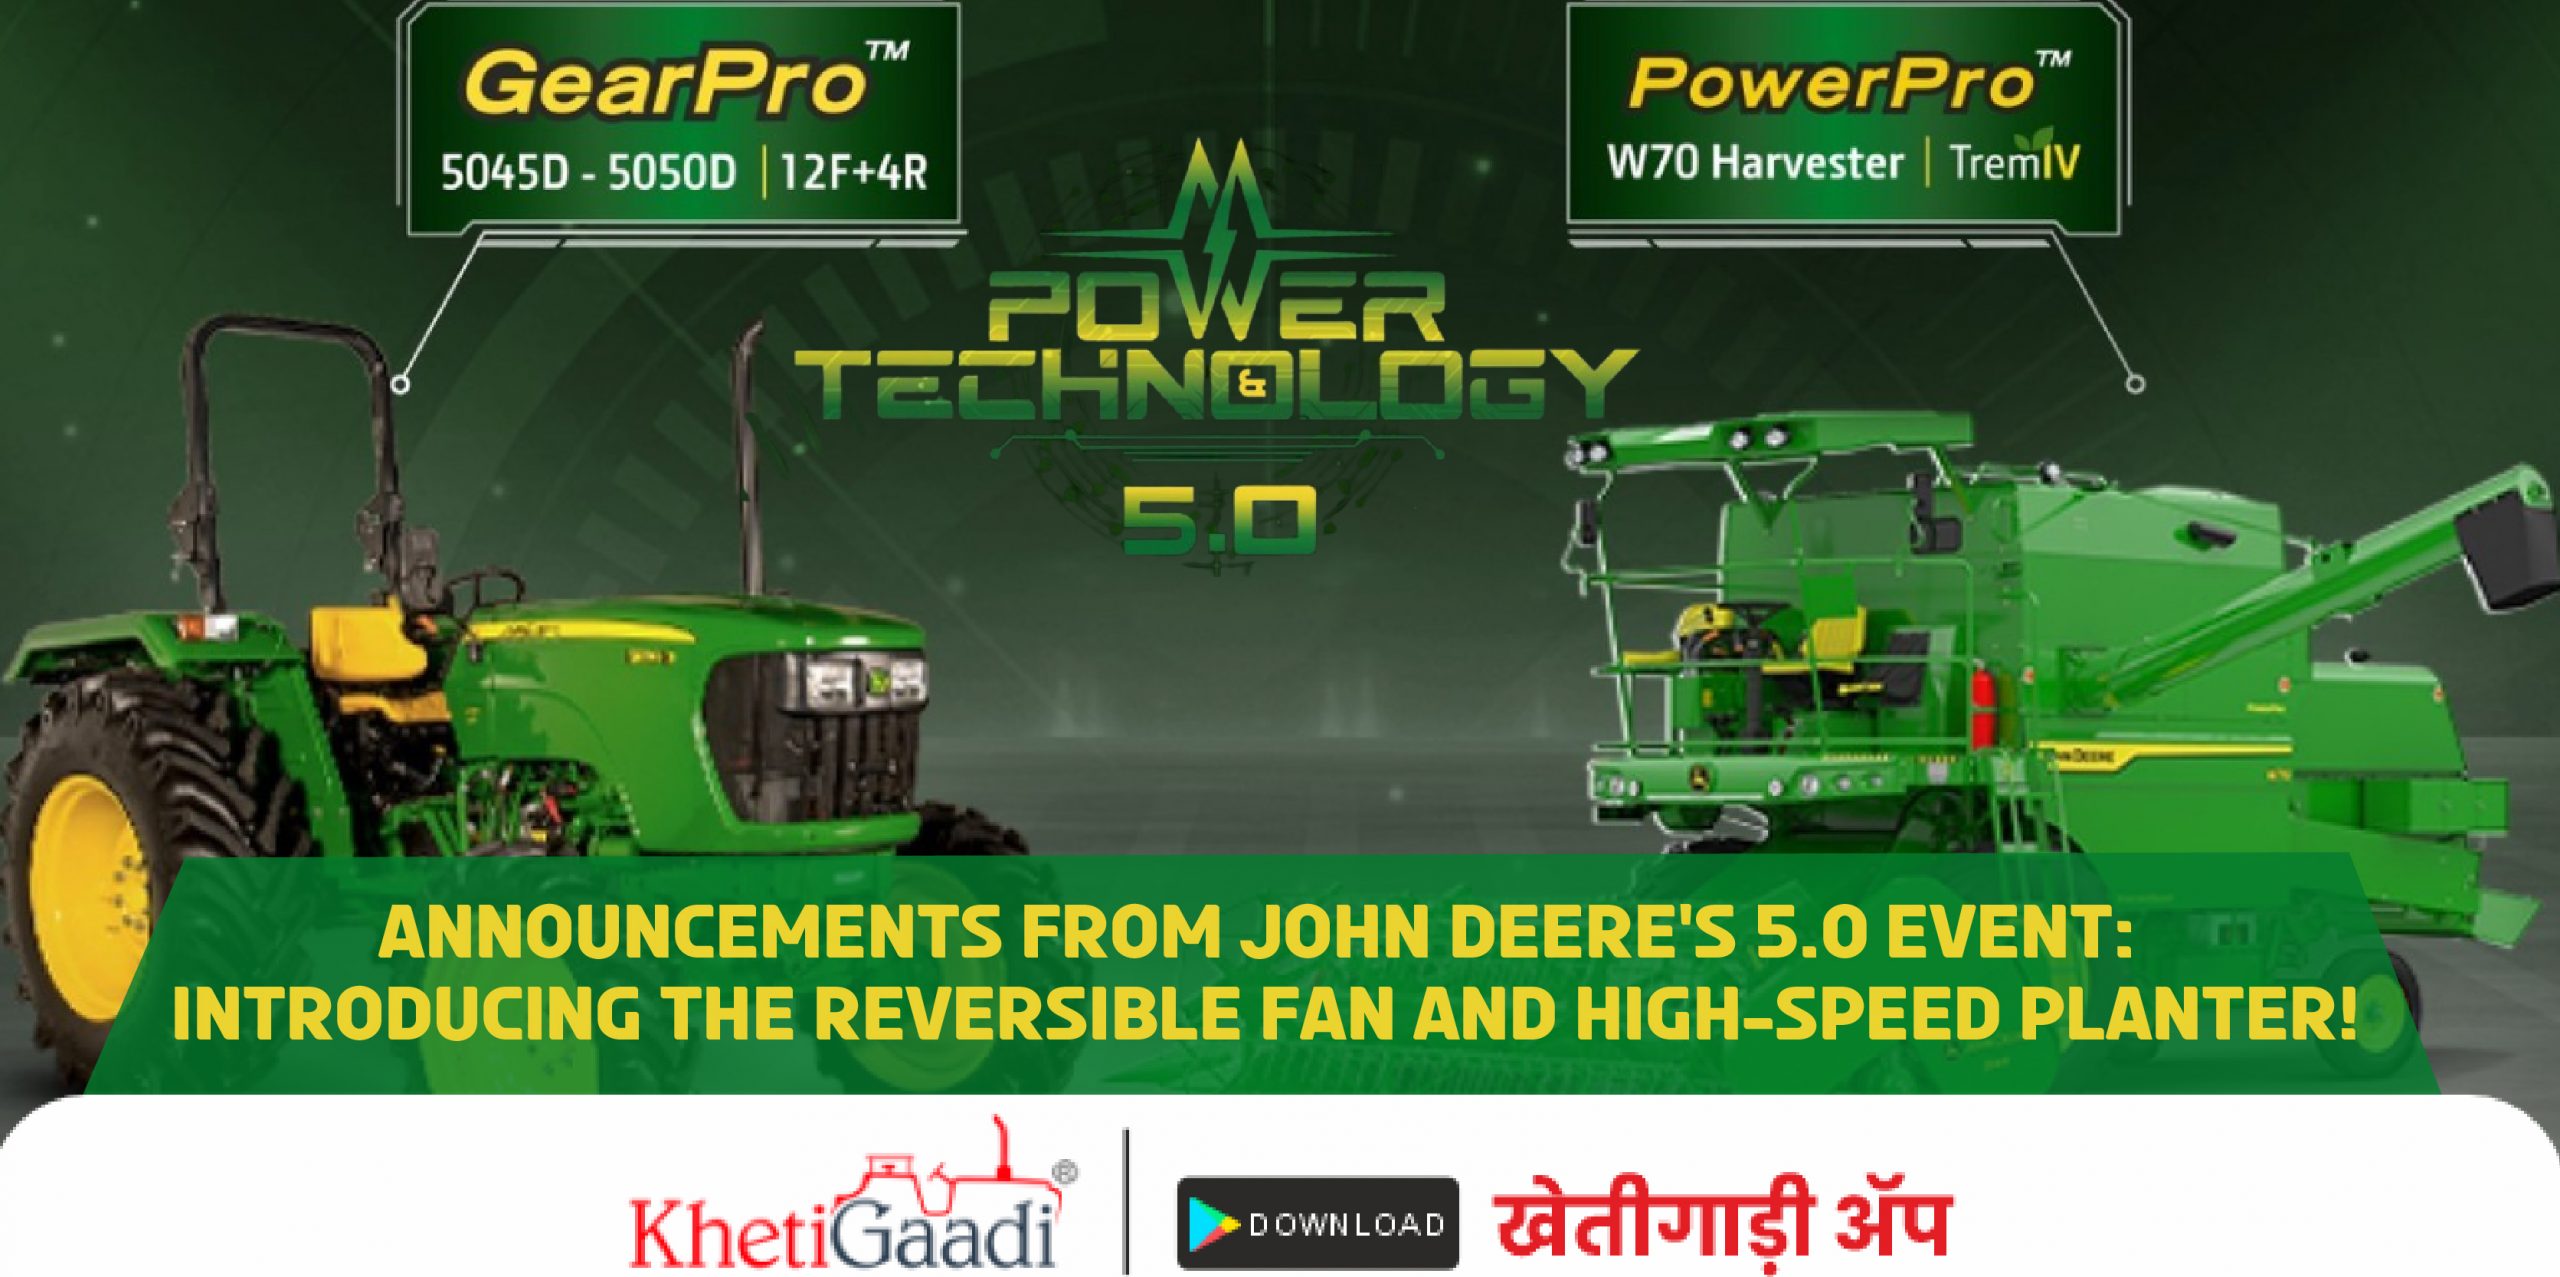 Announcements from John Deere’s 5.0 Event: Introducing the Reversible Fan and High-Speed Planter!